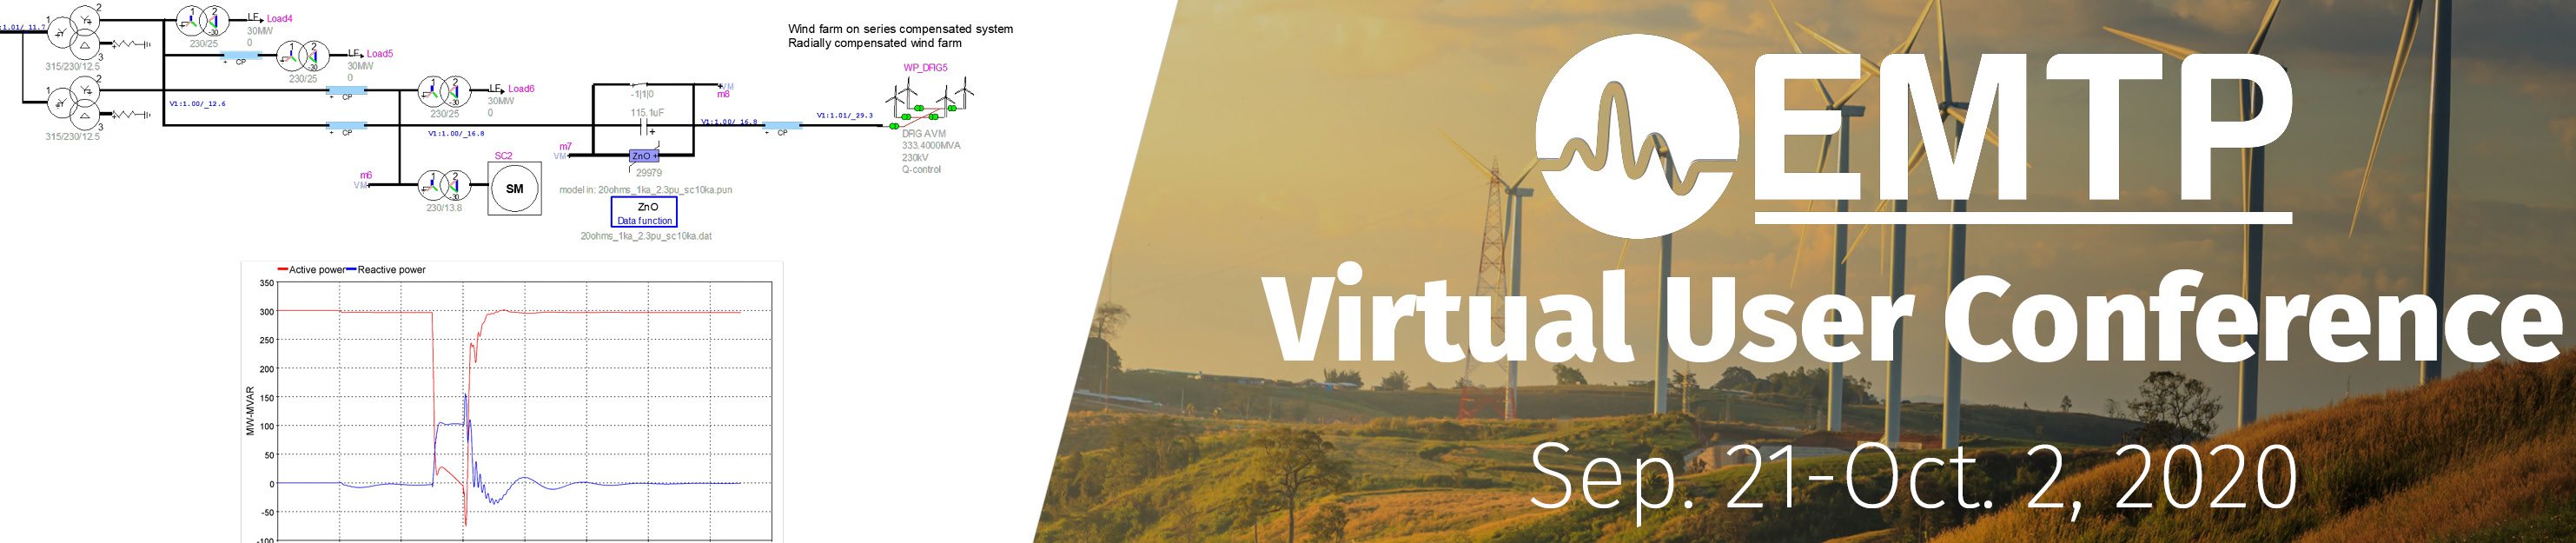 Virtual User Conference 2020